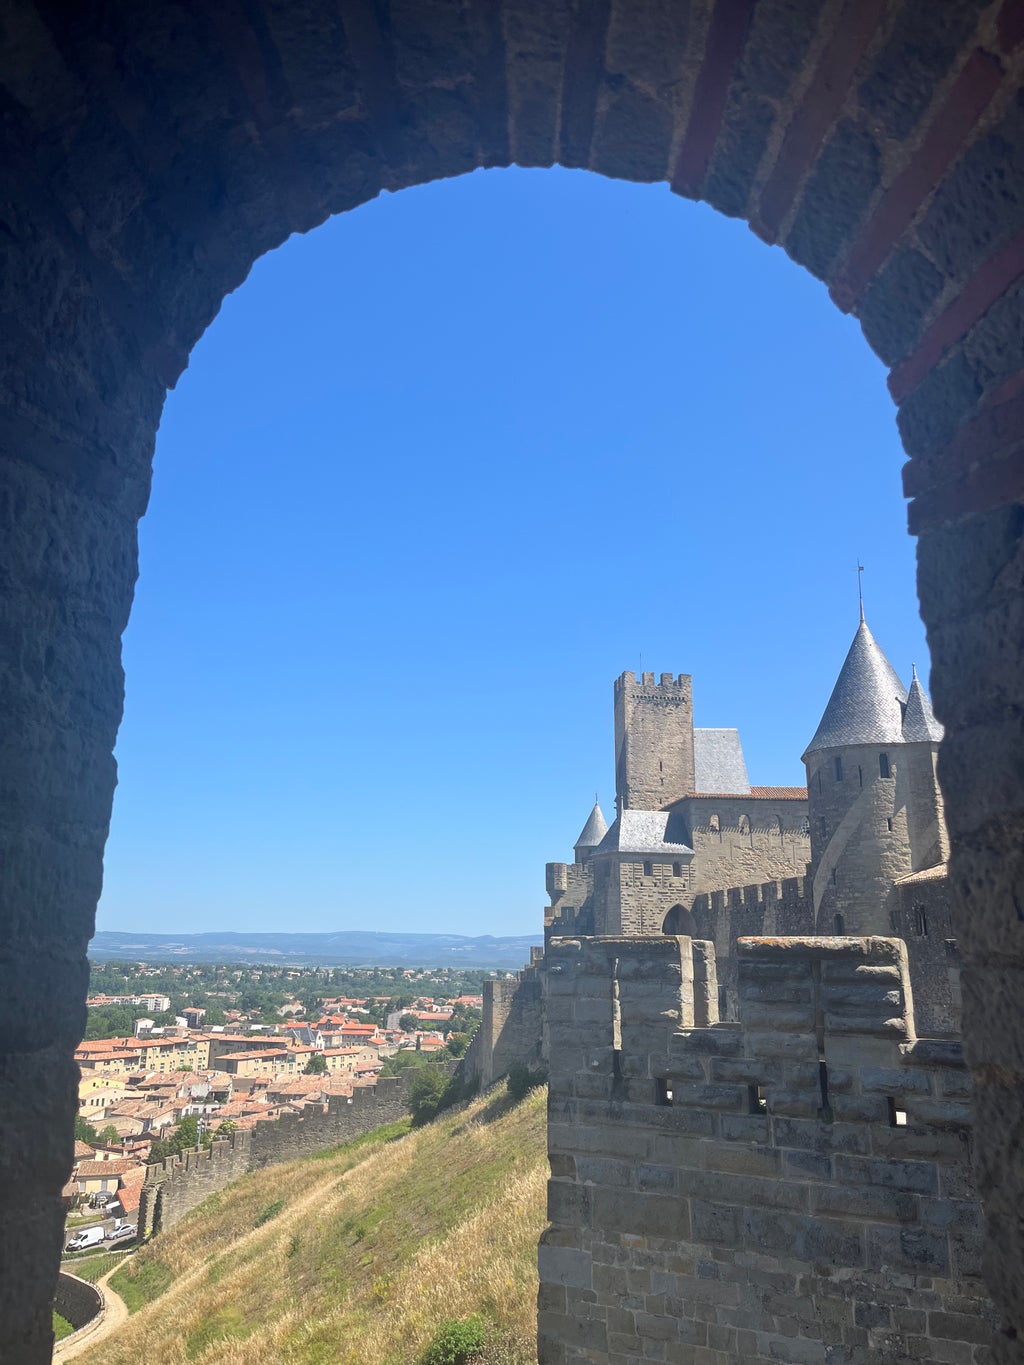 View from a castle in Carcassonne, France